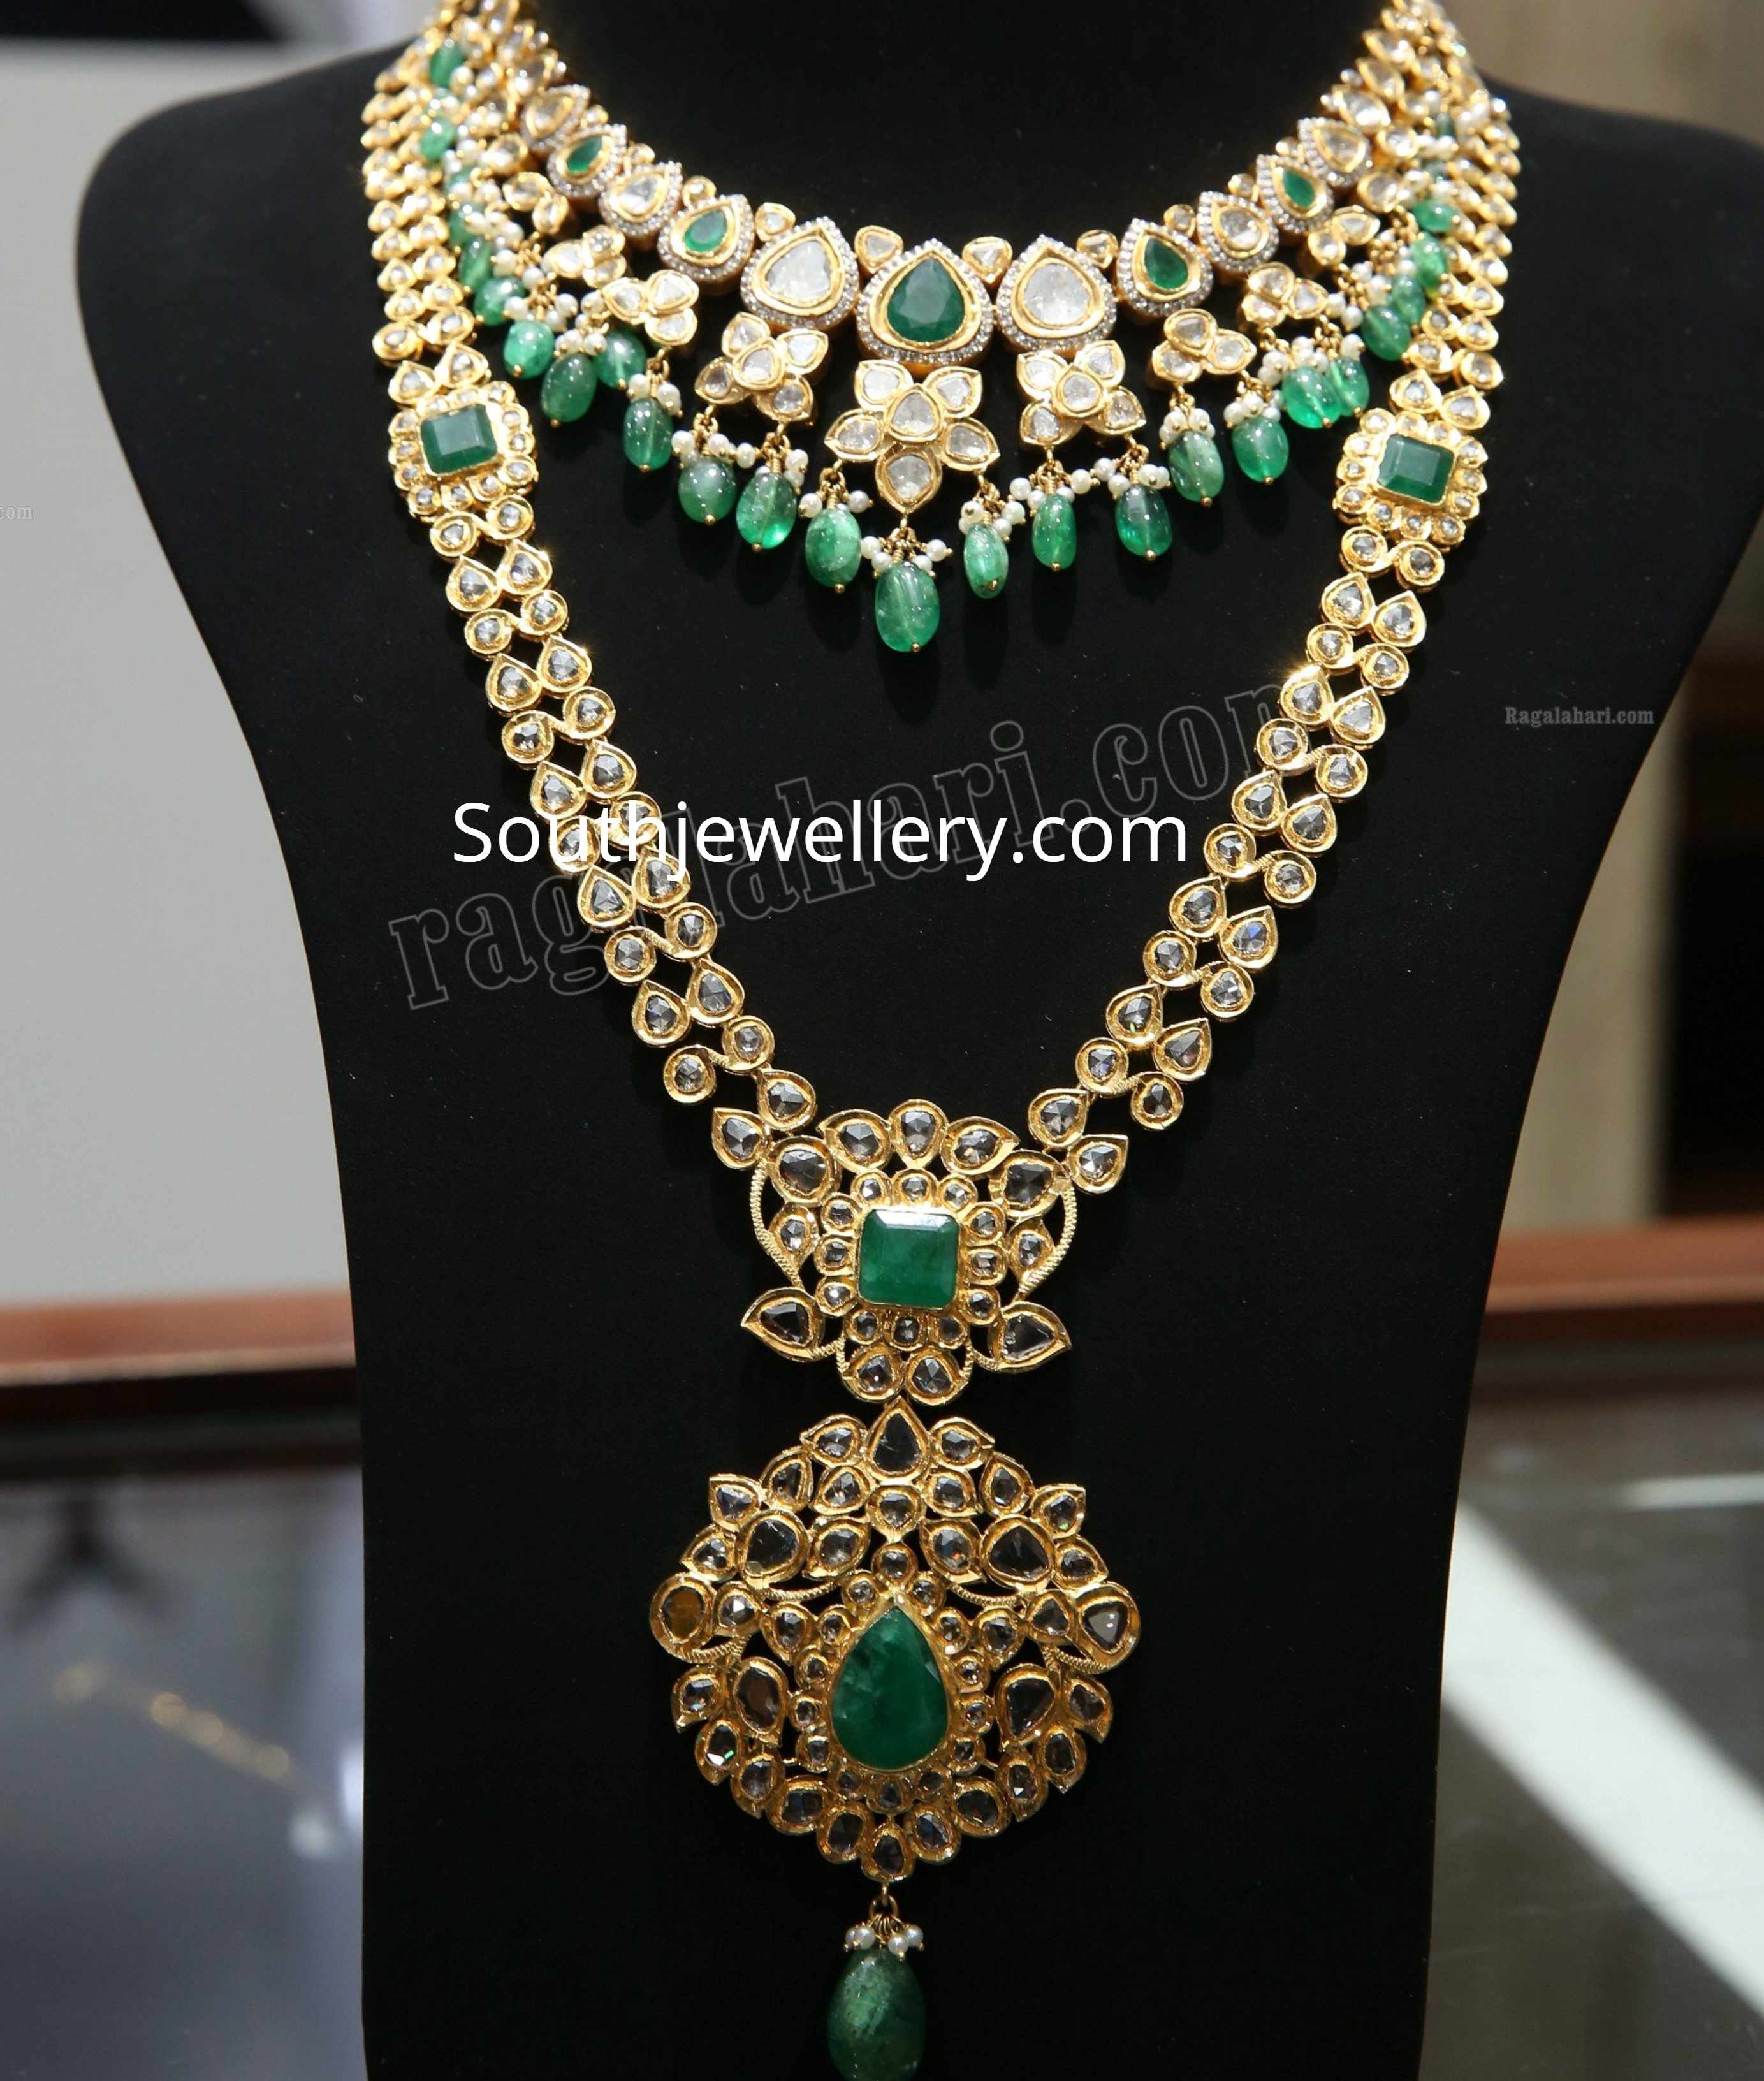 Uncut diamond pachi necklace and haram - Indian Jewellery Designs